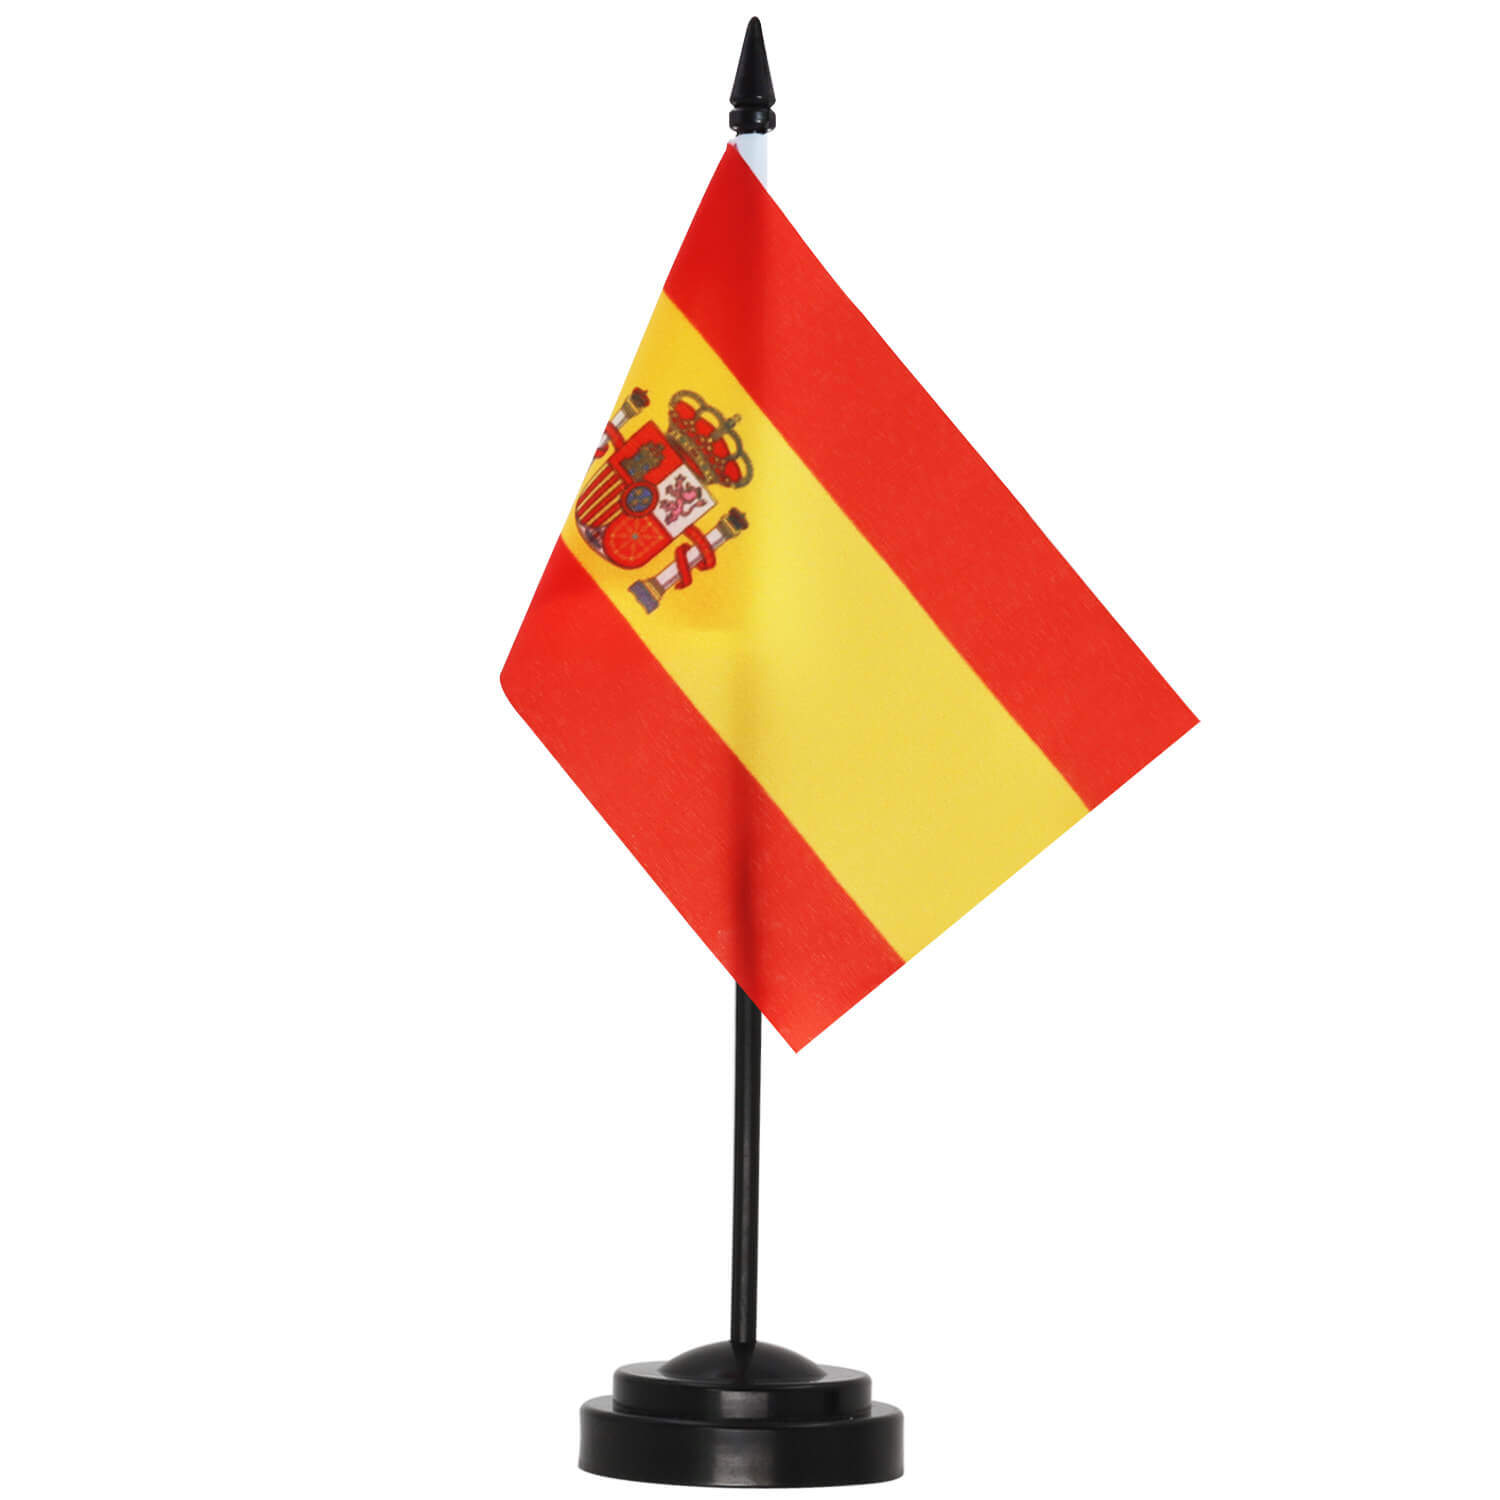 Spain Miniature Fabric Hand Held Table Top Desk Flag Polyester 4" x 6"